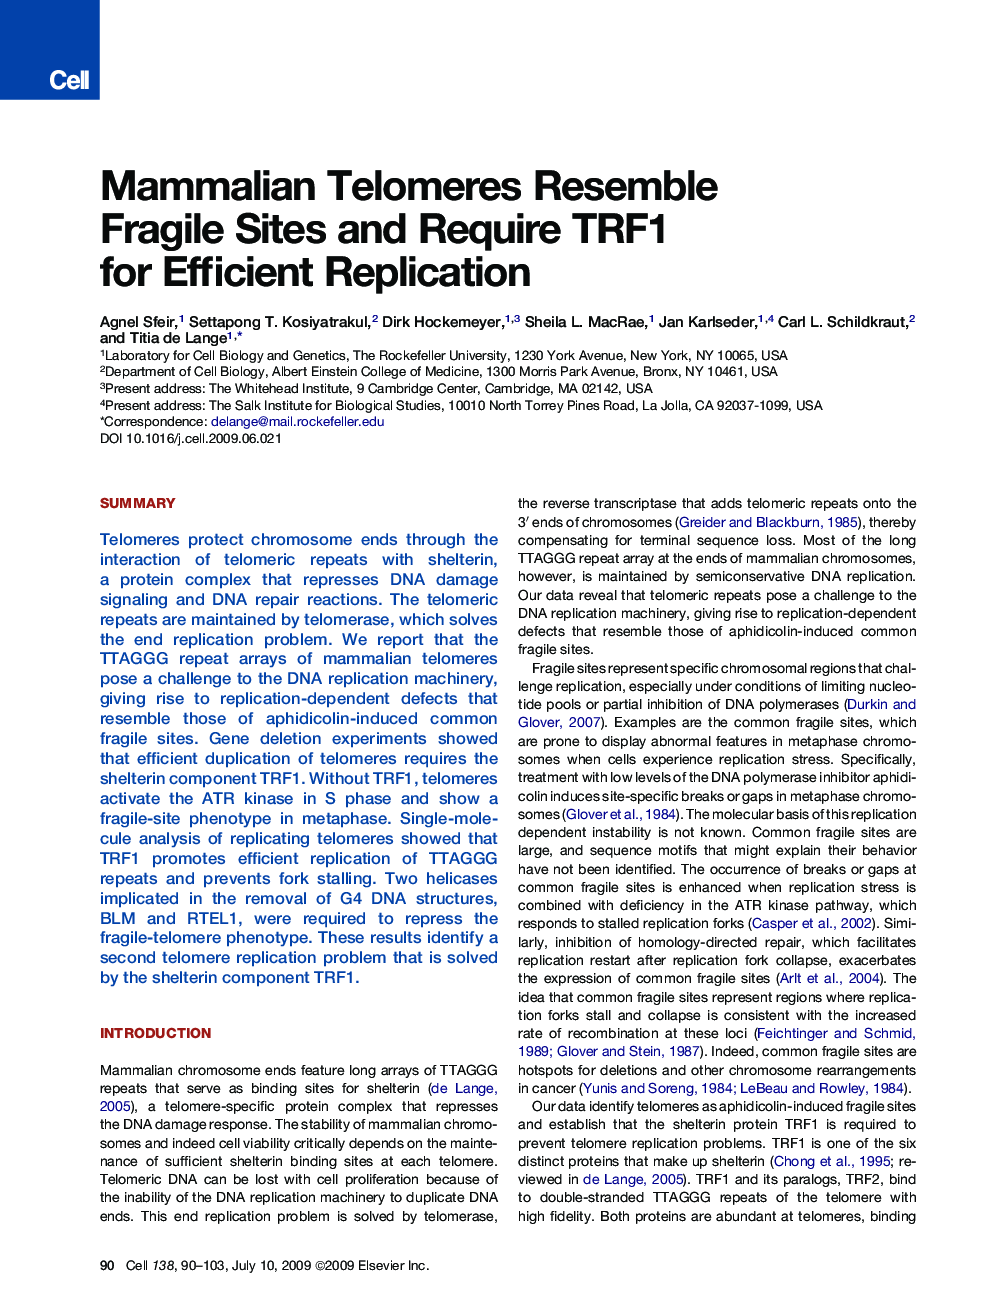 Mammalian Telomeres Resemble Fragile Sites and Require TRF1 for Efficient Replication